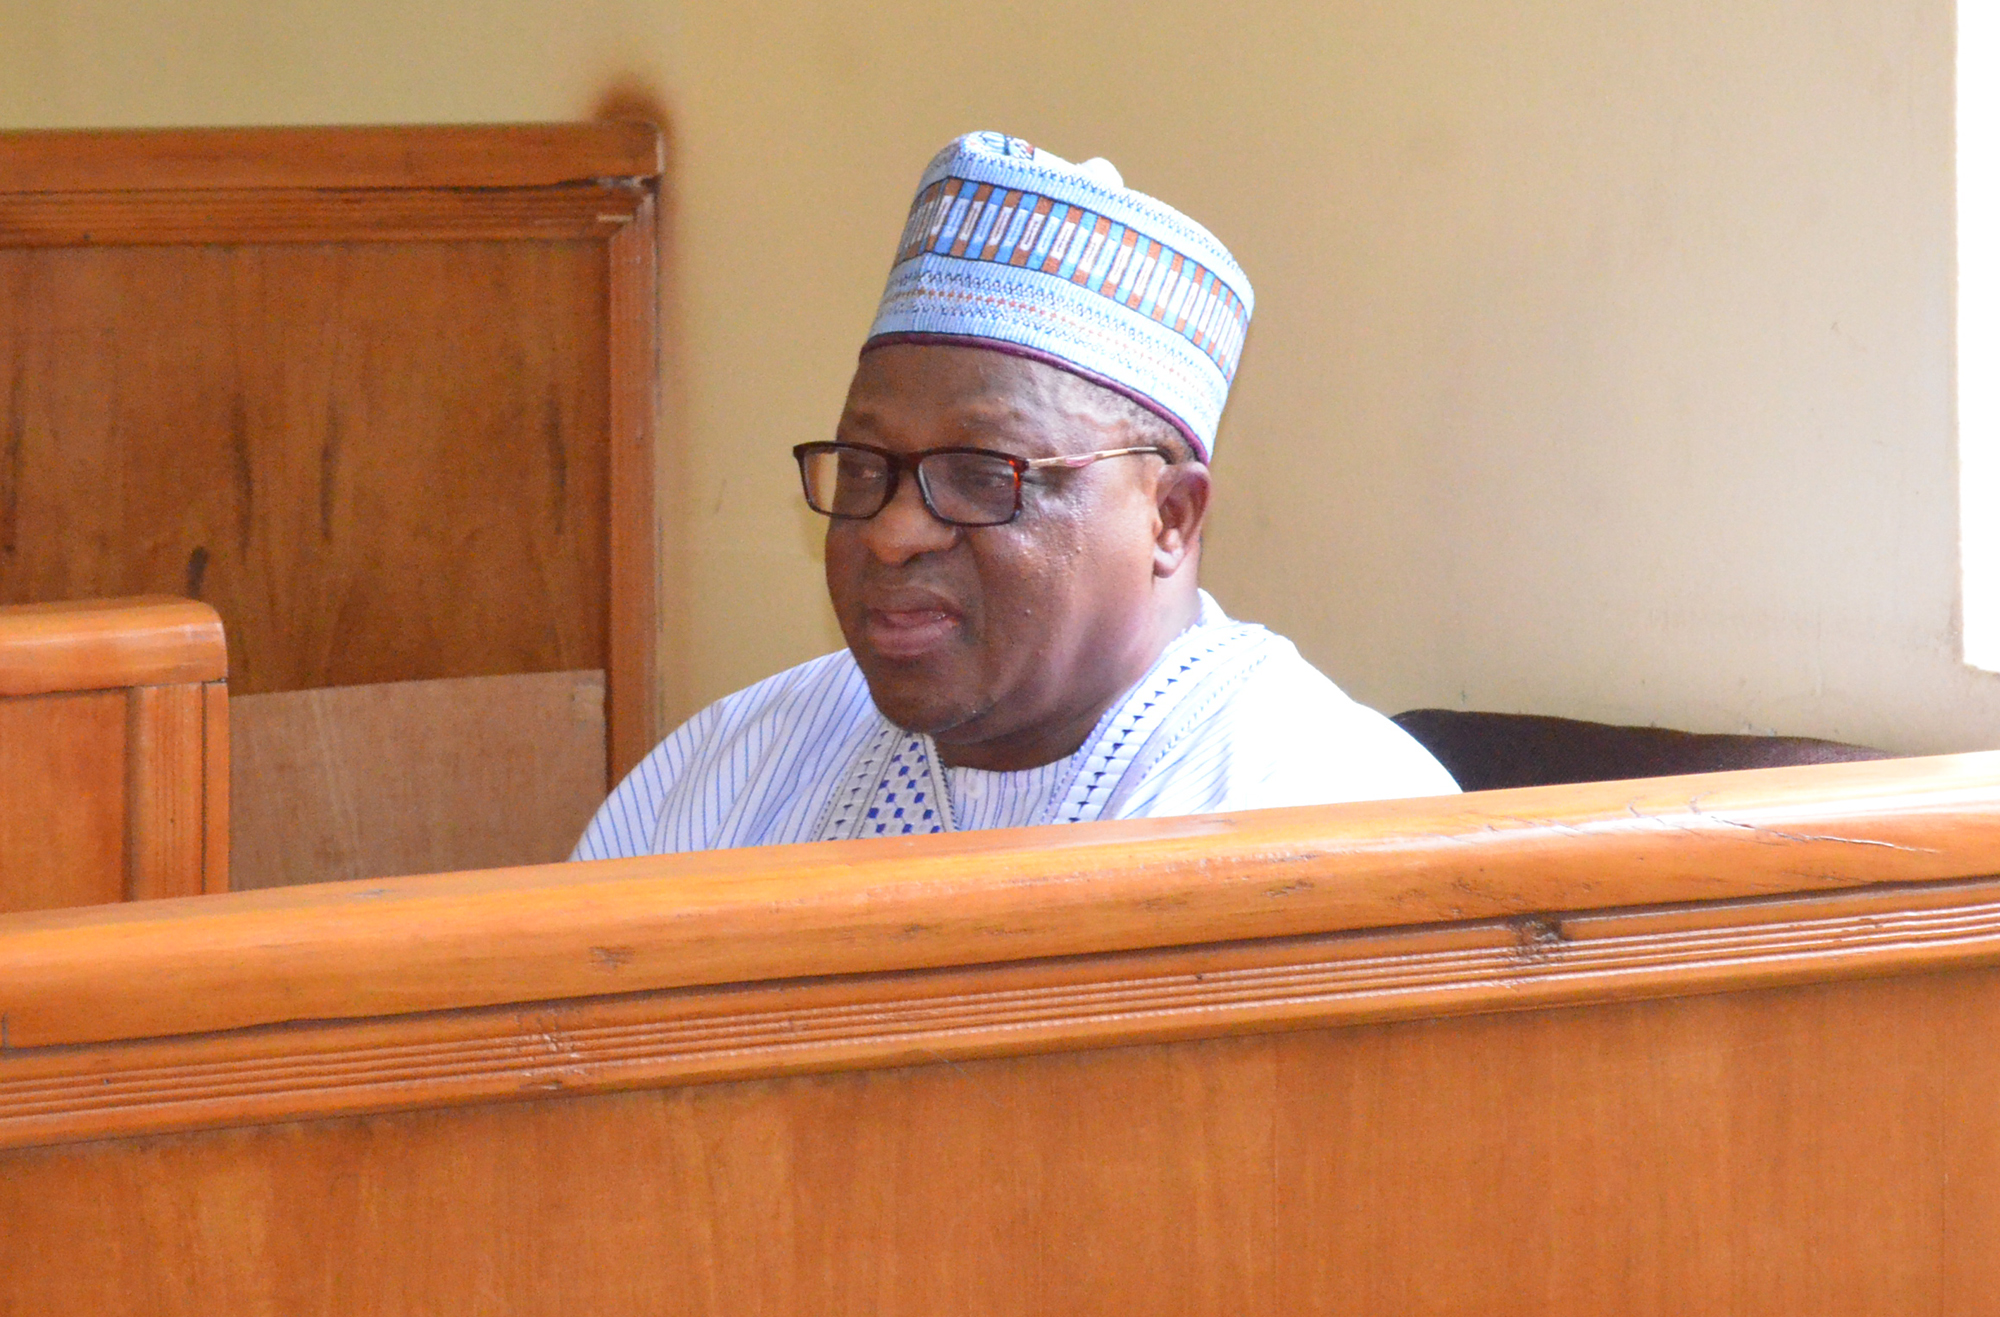 Ex-Gov Asks Court To Free Him Or Reduce His 10-Yr Jail Term